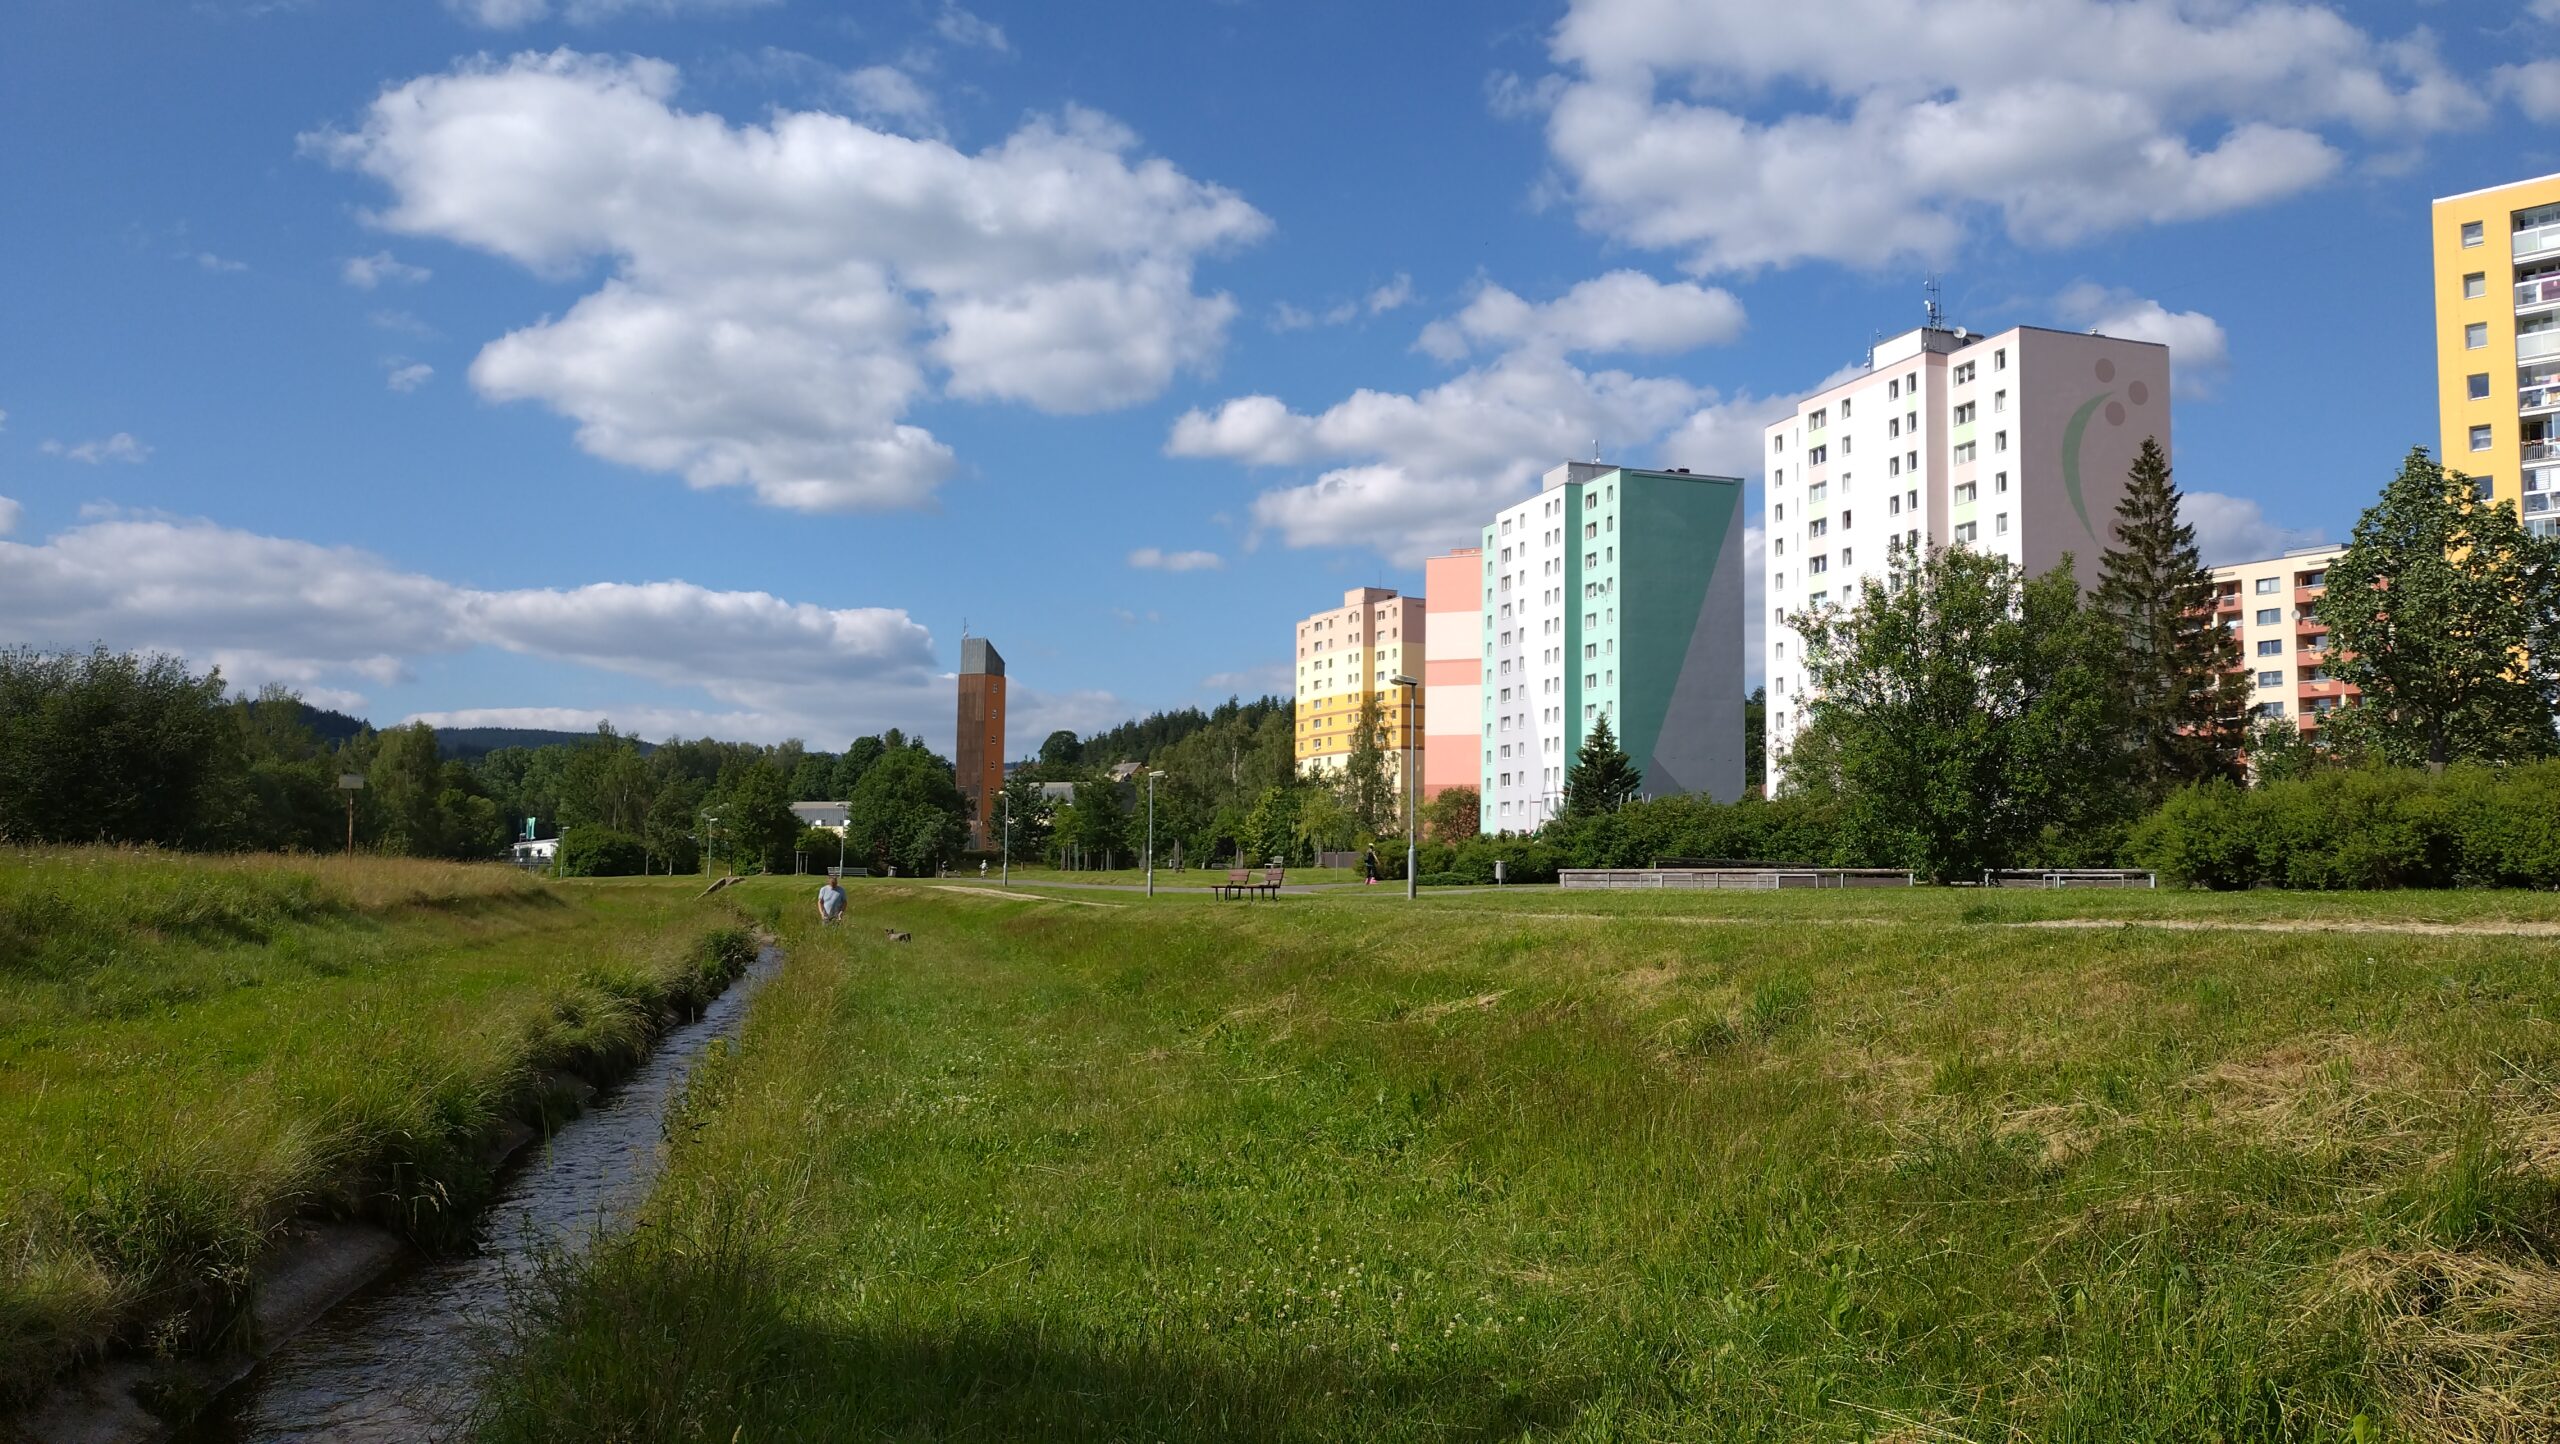 View at the Bela Nisa, an urban stream in the densely populated area of Jablonec nad Nisou